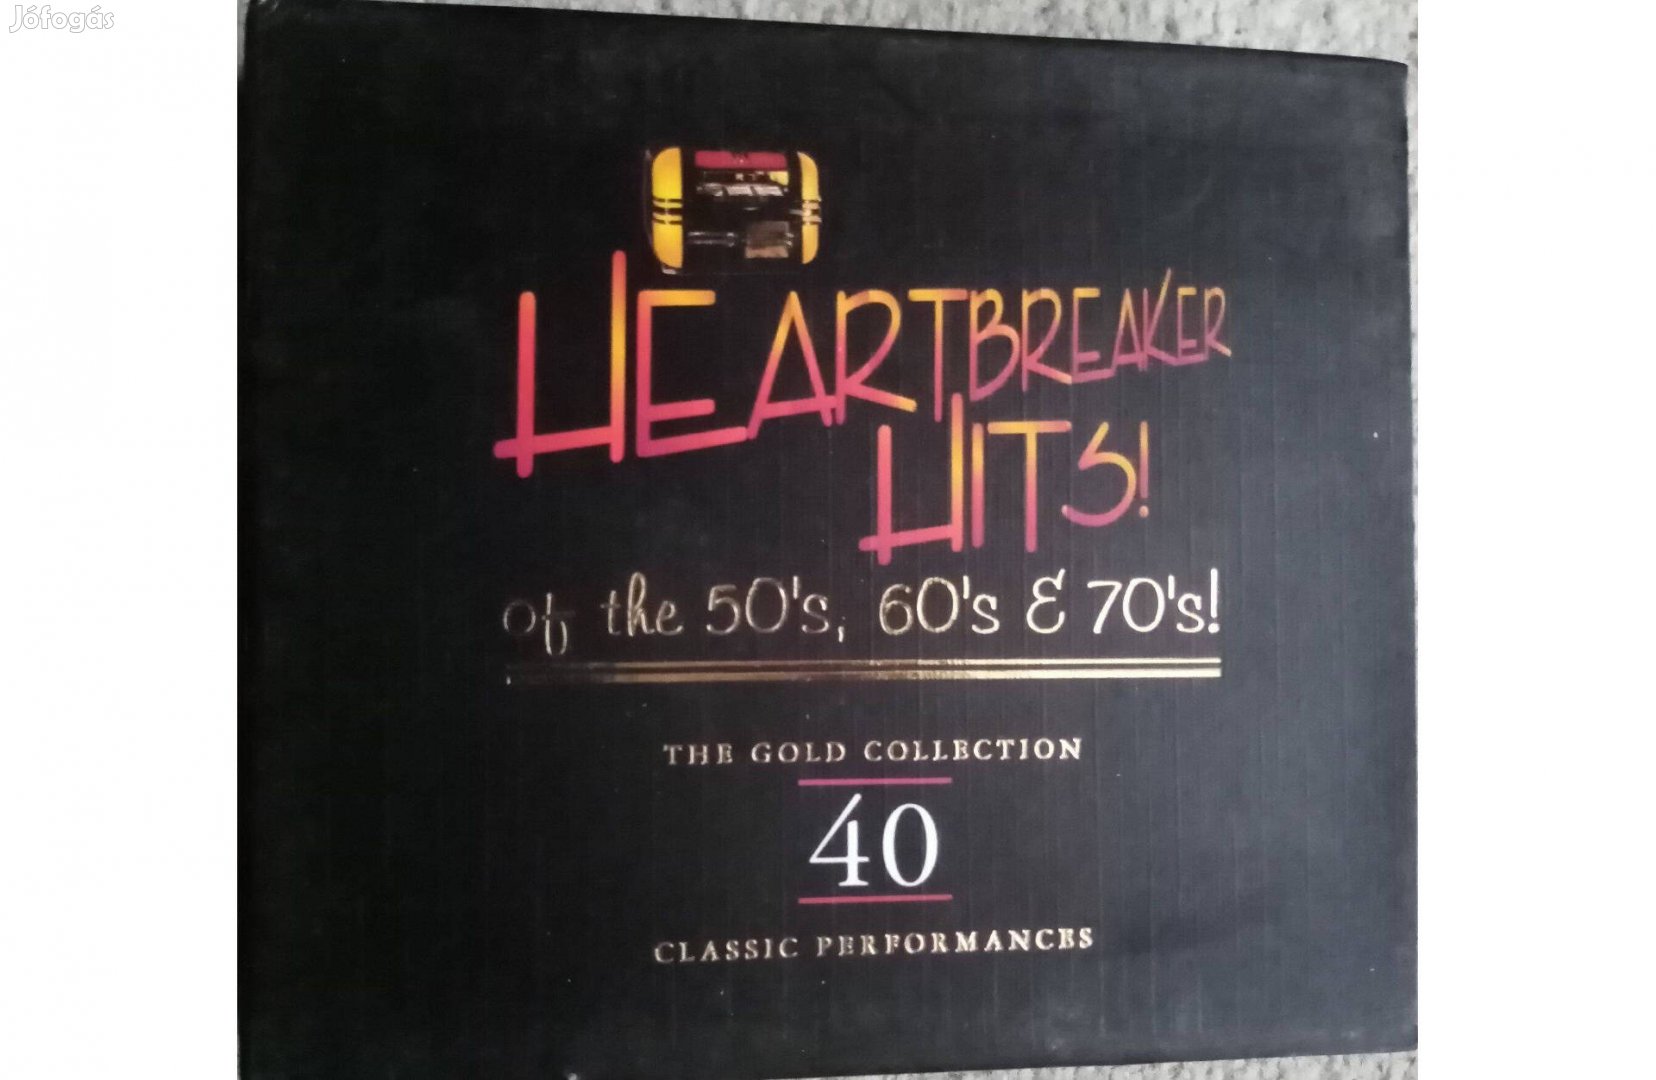 Heartbreaker Hits! of the 50's, 60's & 70's! The Gold Collection